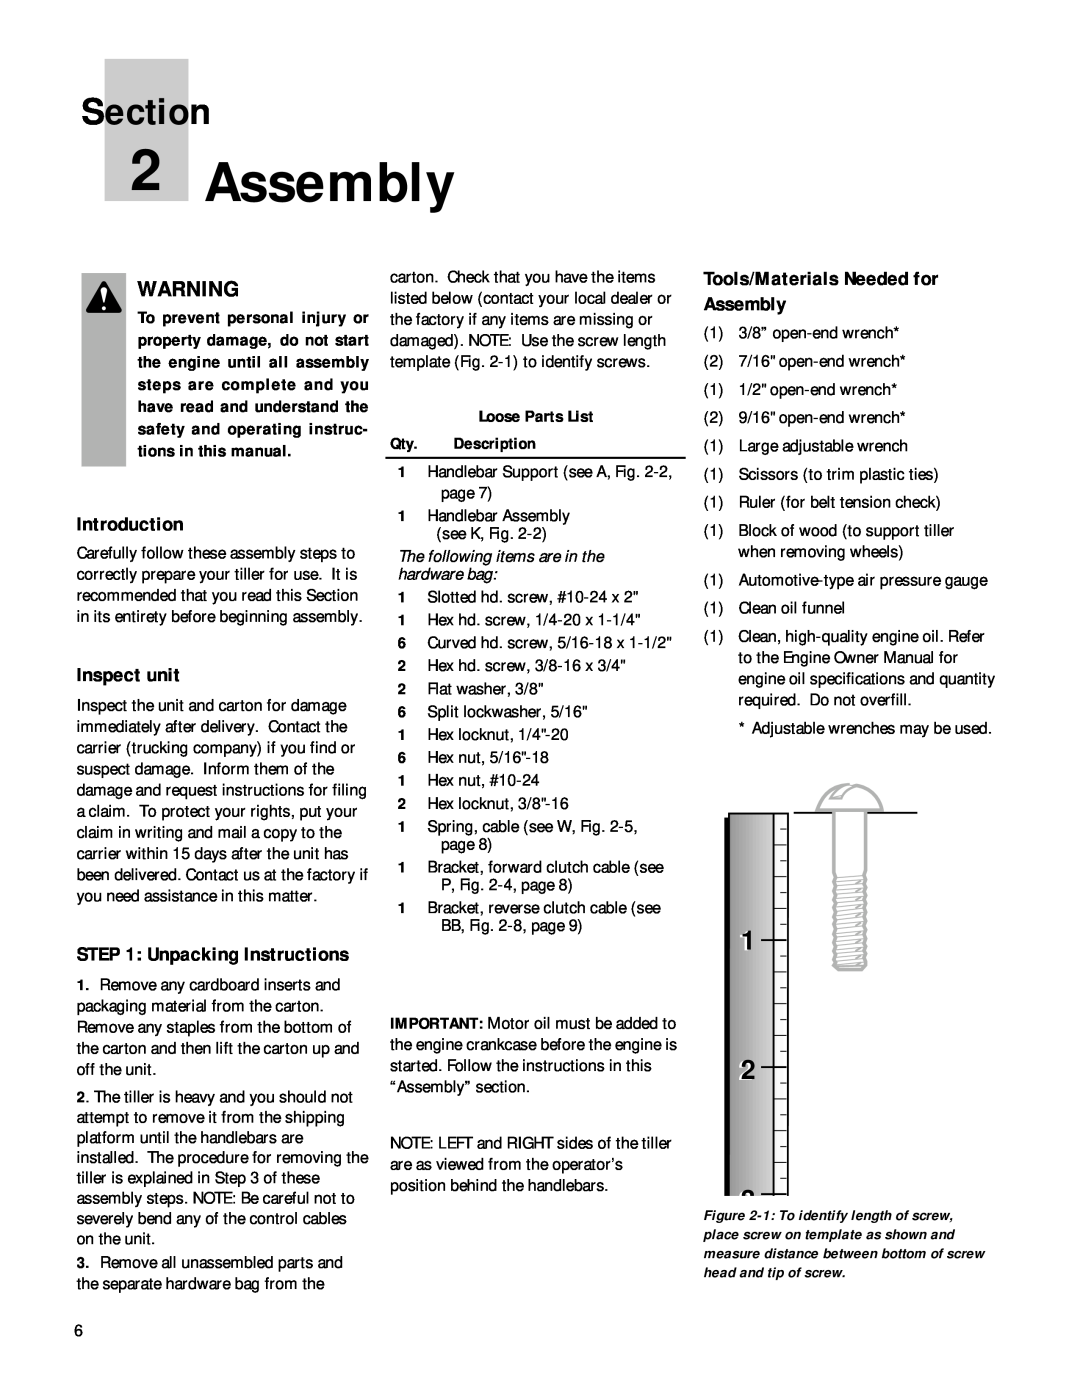 Bolens 12180 Introduction, Inspect unit, Tools/Materials Needed for Assembly, Unpacking Instructions, Section 